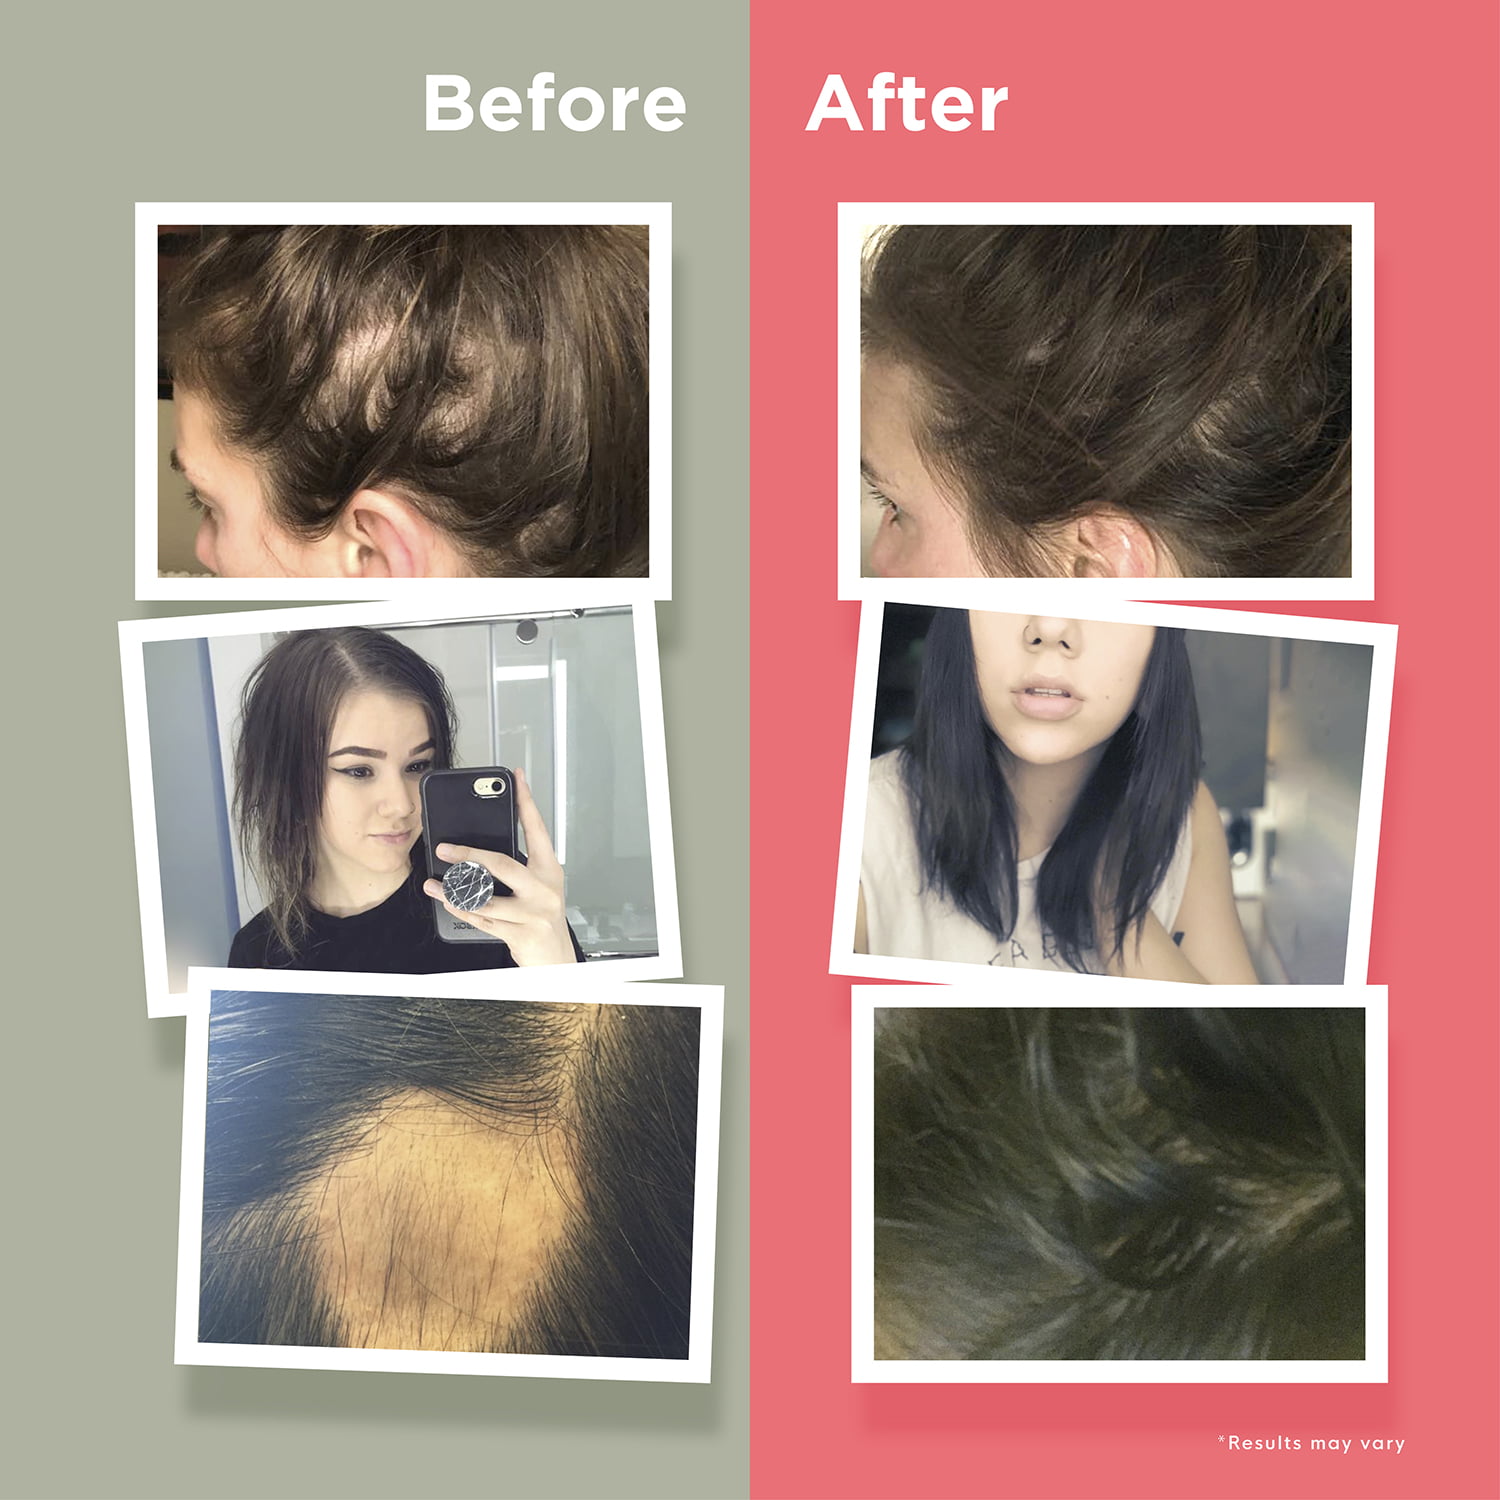 Hair Loss Singapore - Doctor's Guide to Hair Growth+ inClinic by Nourkin®